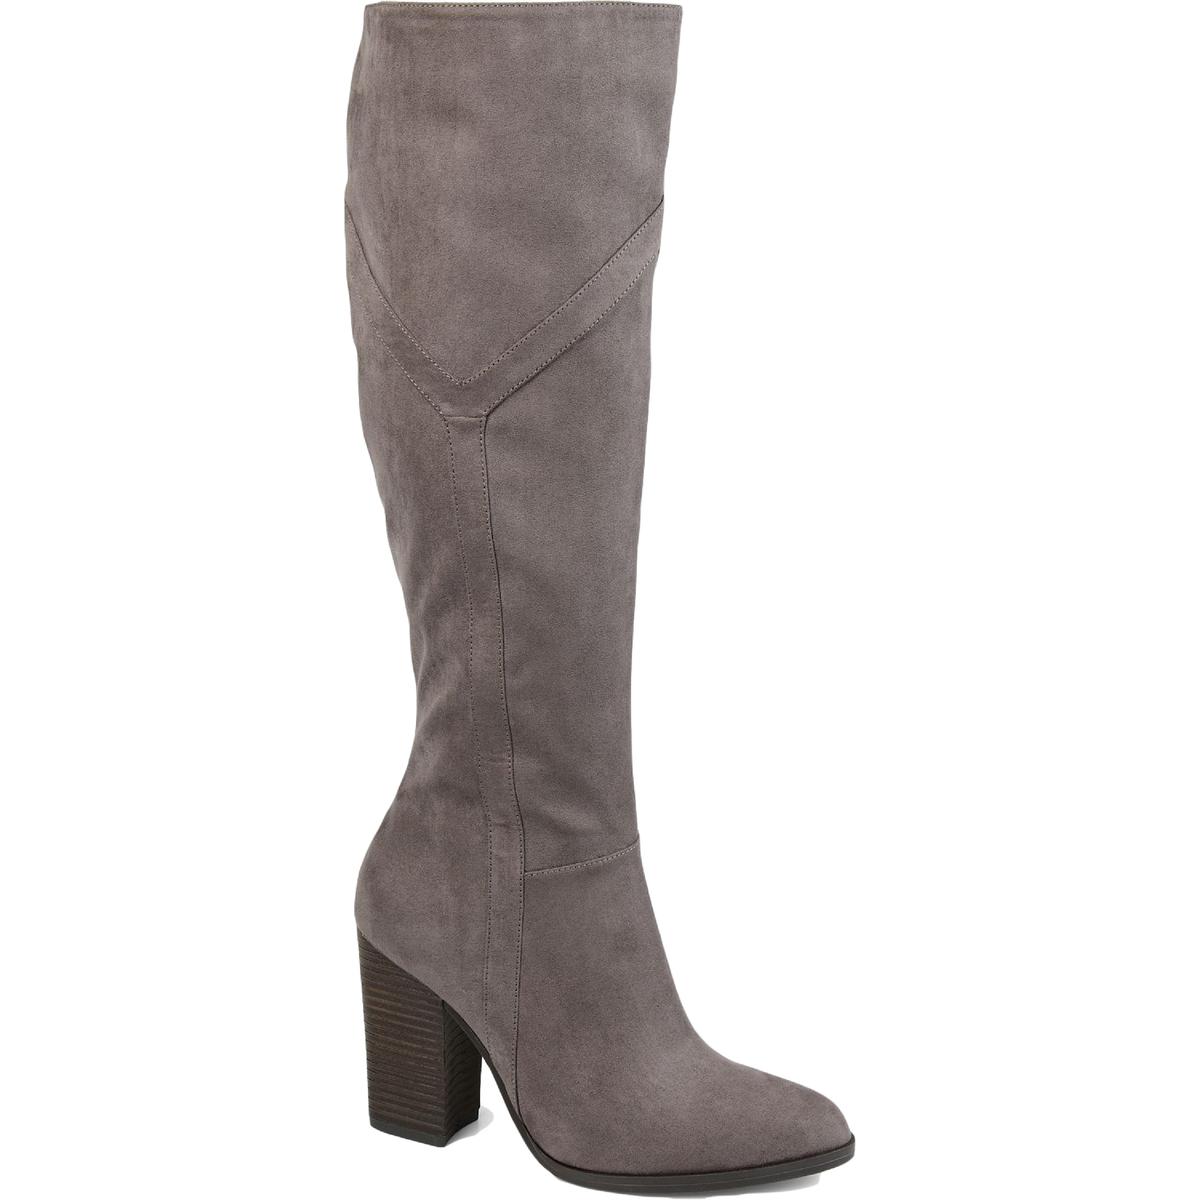 Journee Collection Womens Kyllie Extra Wide Calf Knee-High Boots Shoes BHFO  6394